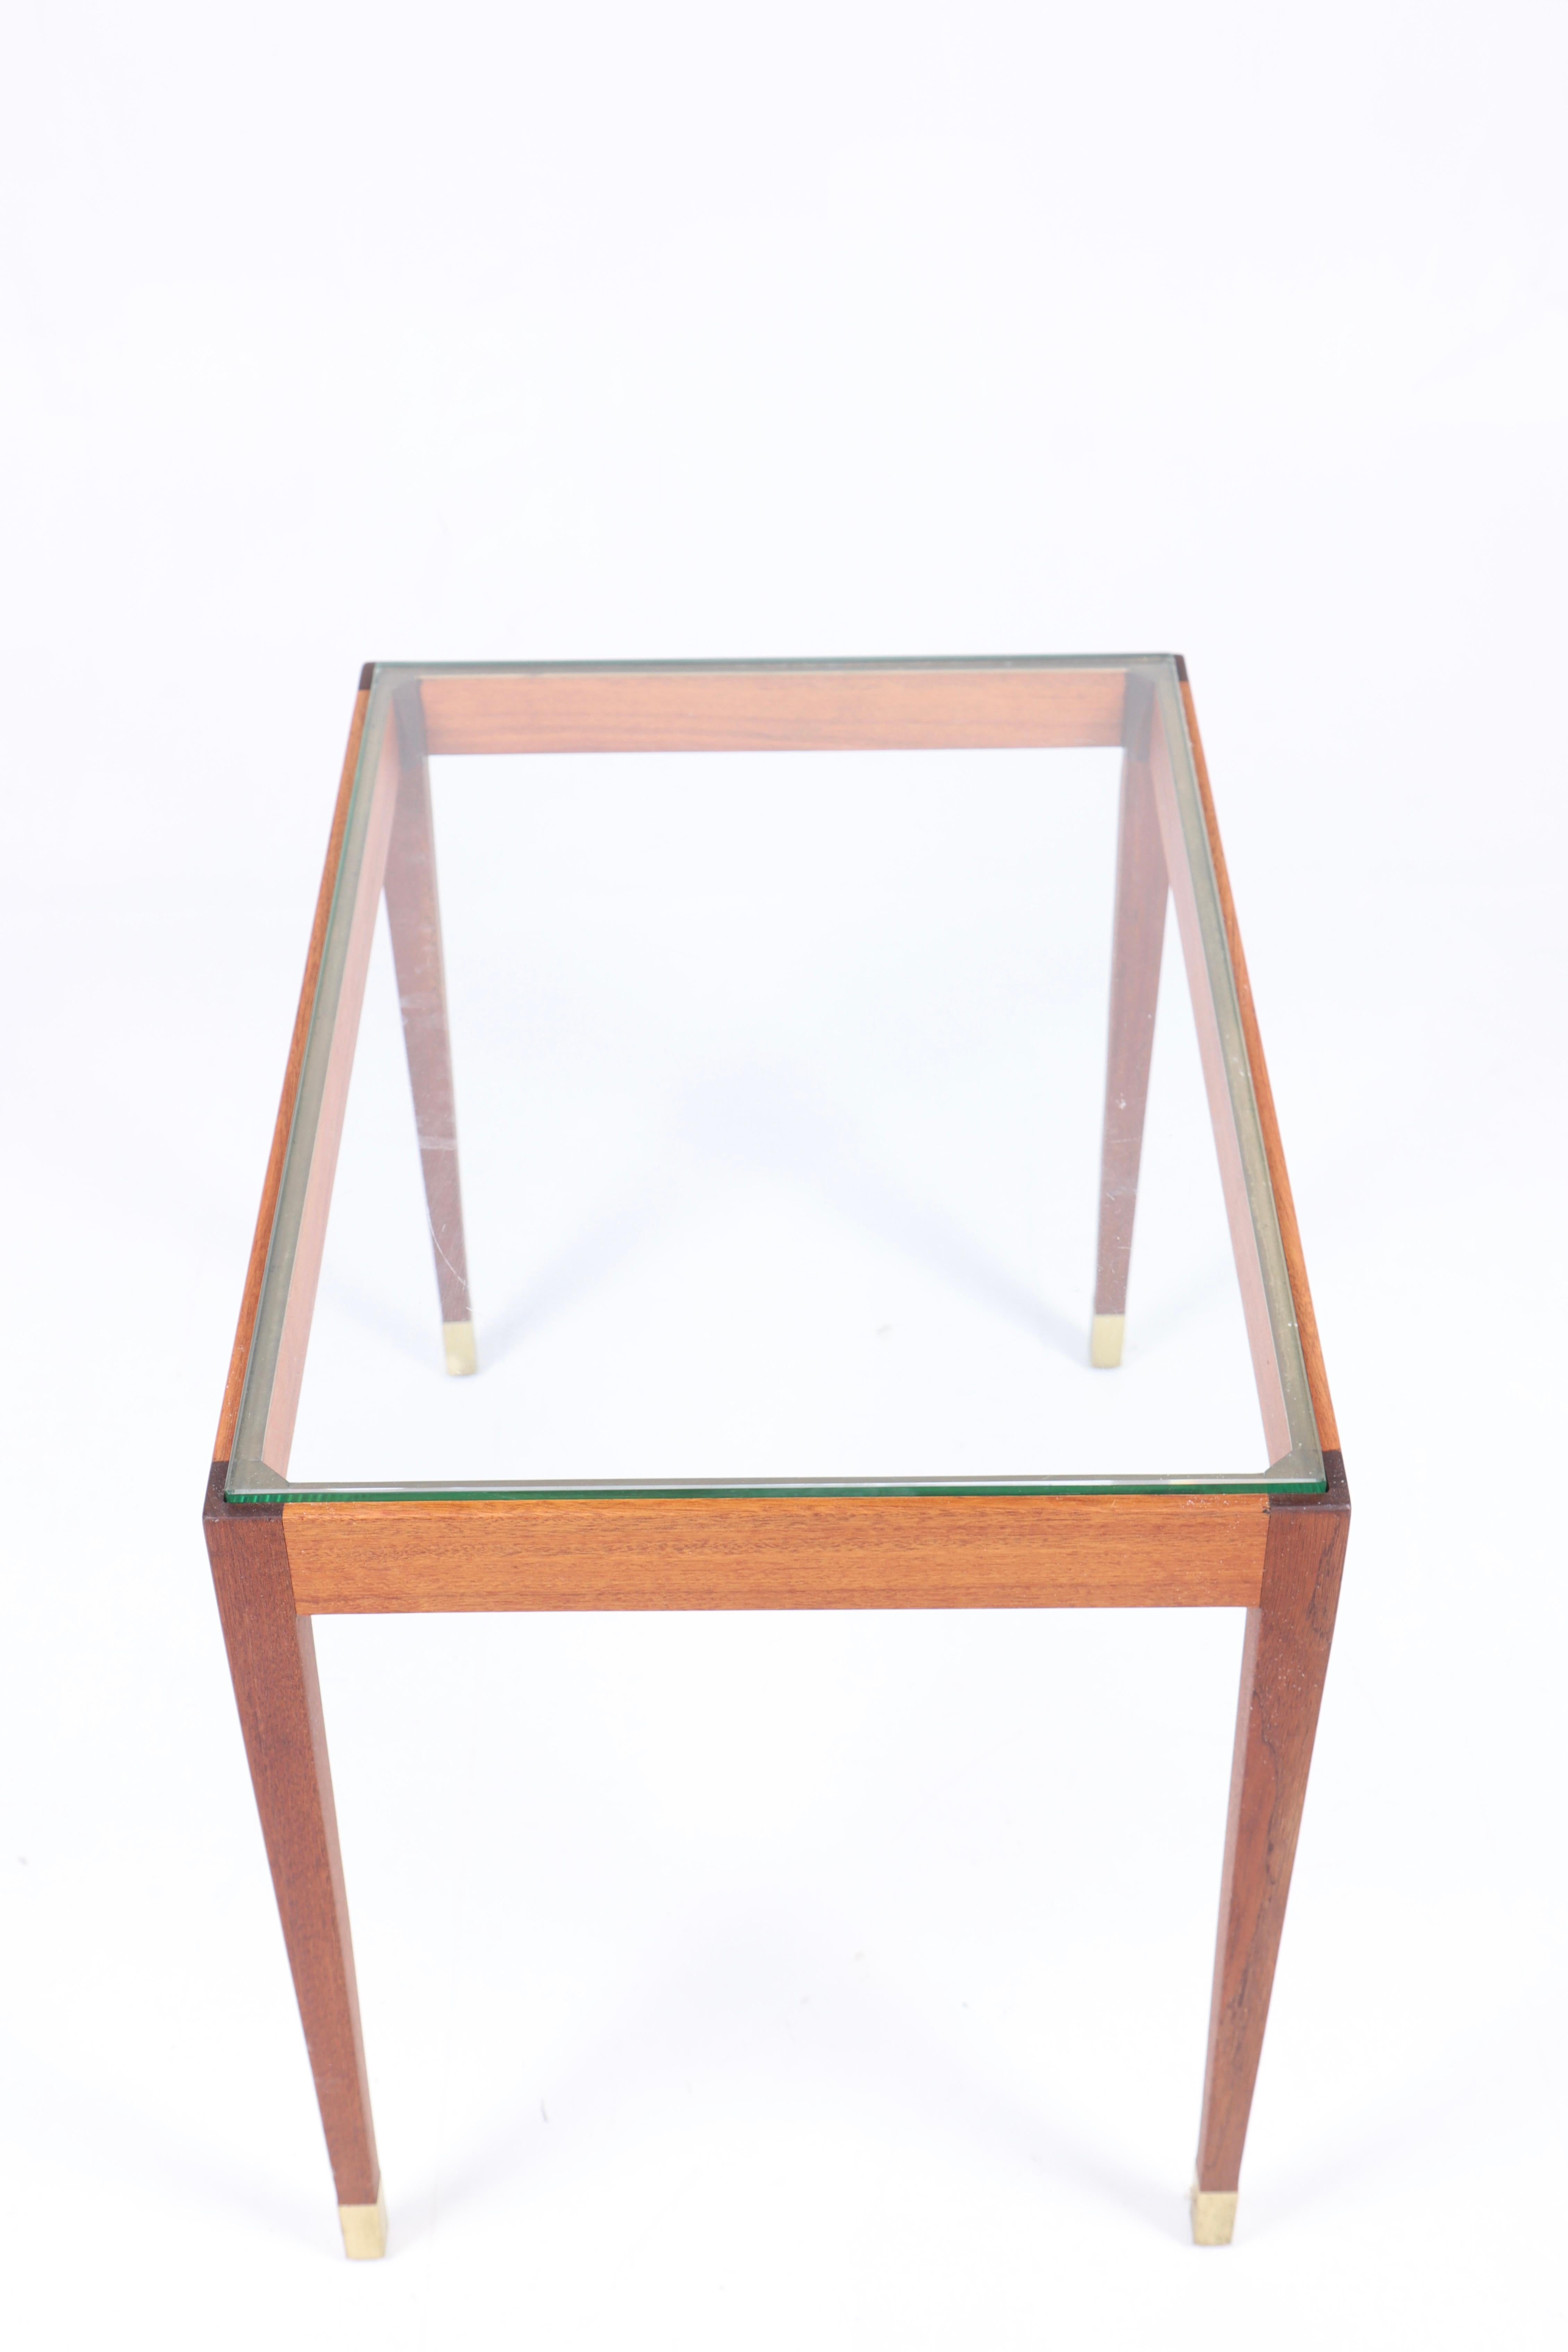 Midcentury Low Table in Glass and Teak, Made in Denmark 1960s For Sale 2